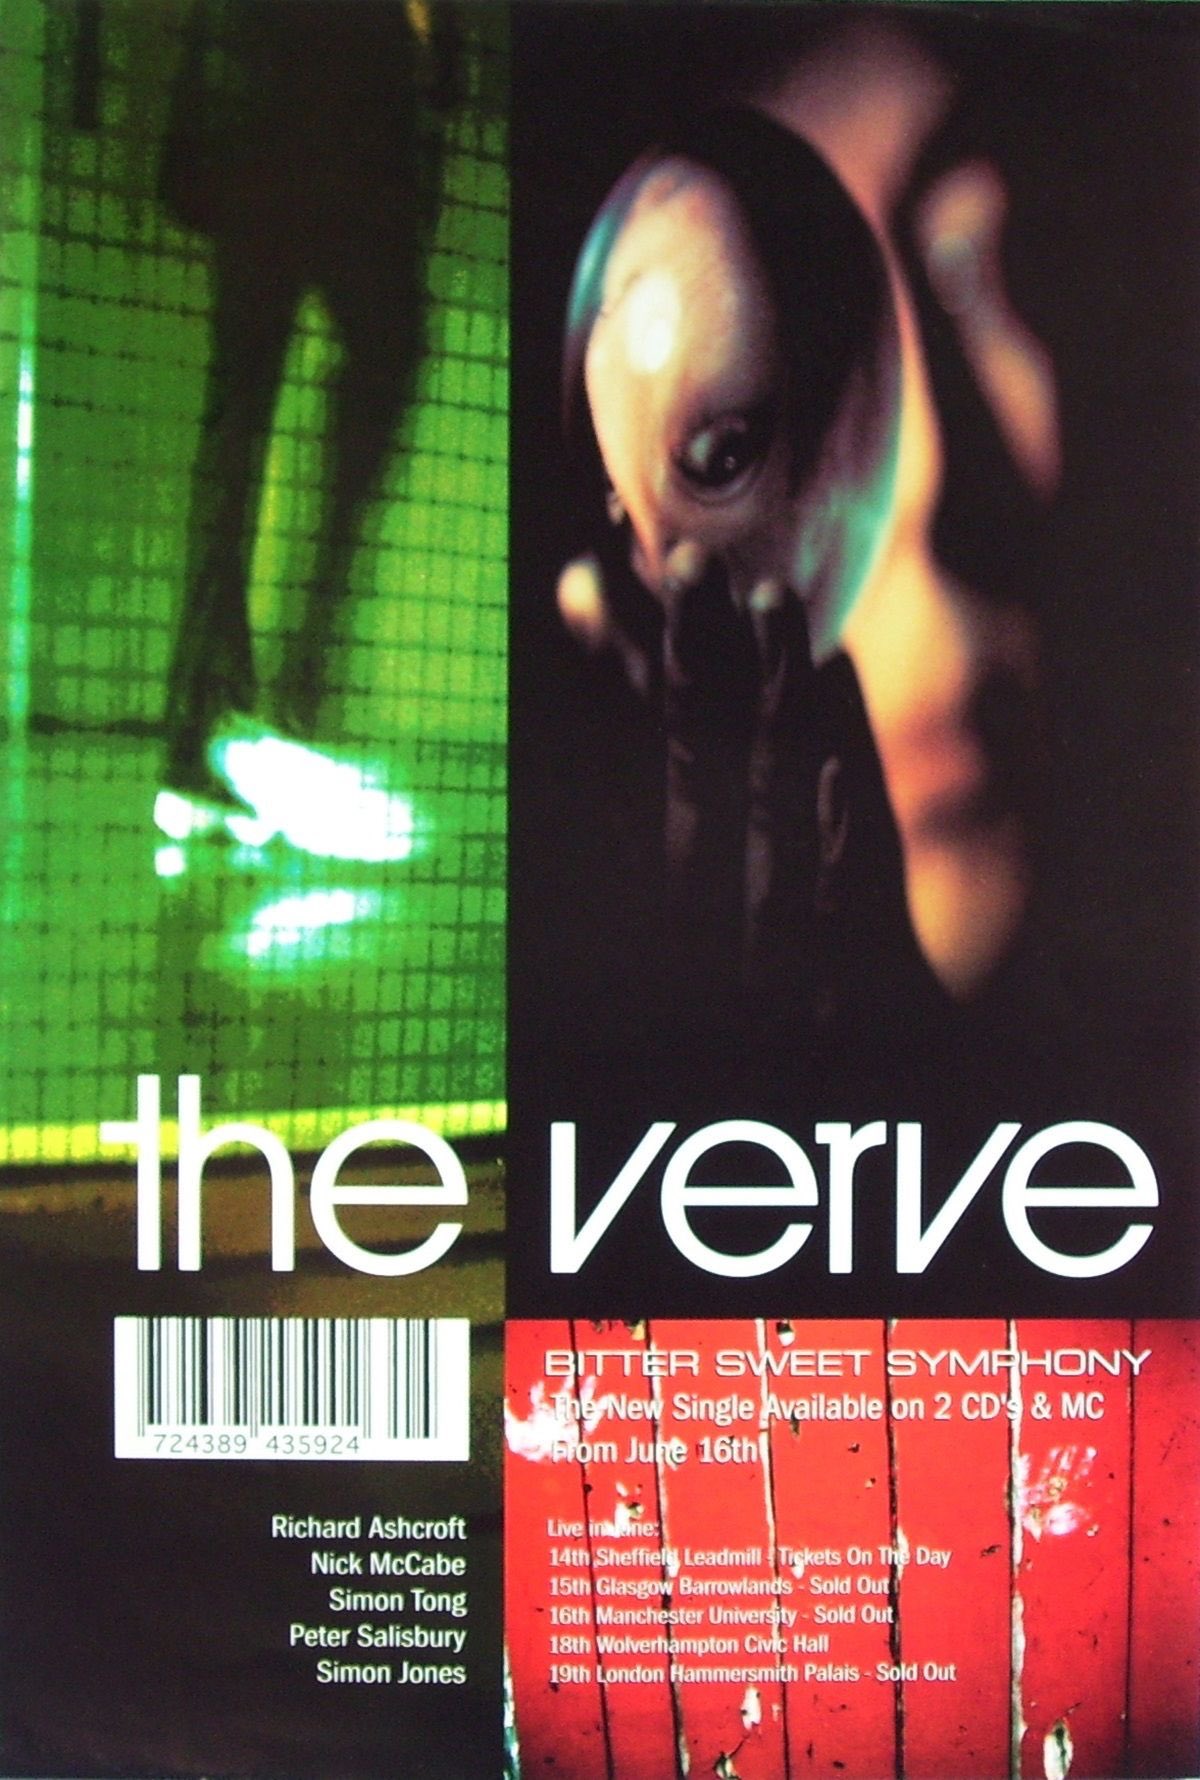 Star Shaped On This Day 16th June 1997 The Verve Returned With The Humongous Single Bitter Sweet Symphony The Single Had An Iconic Video Filmed On Hoxton Street London And